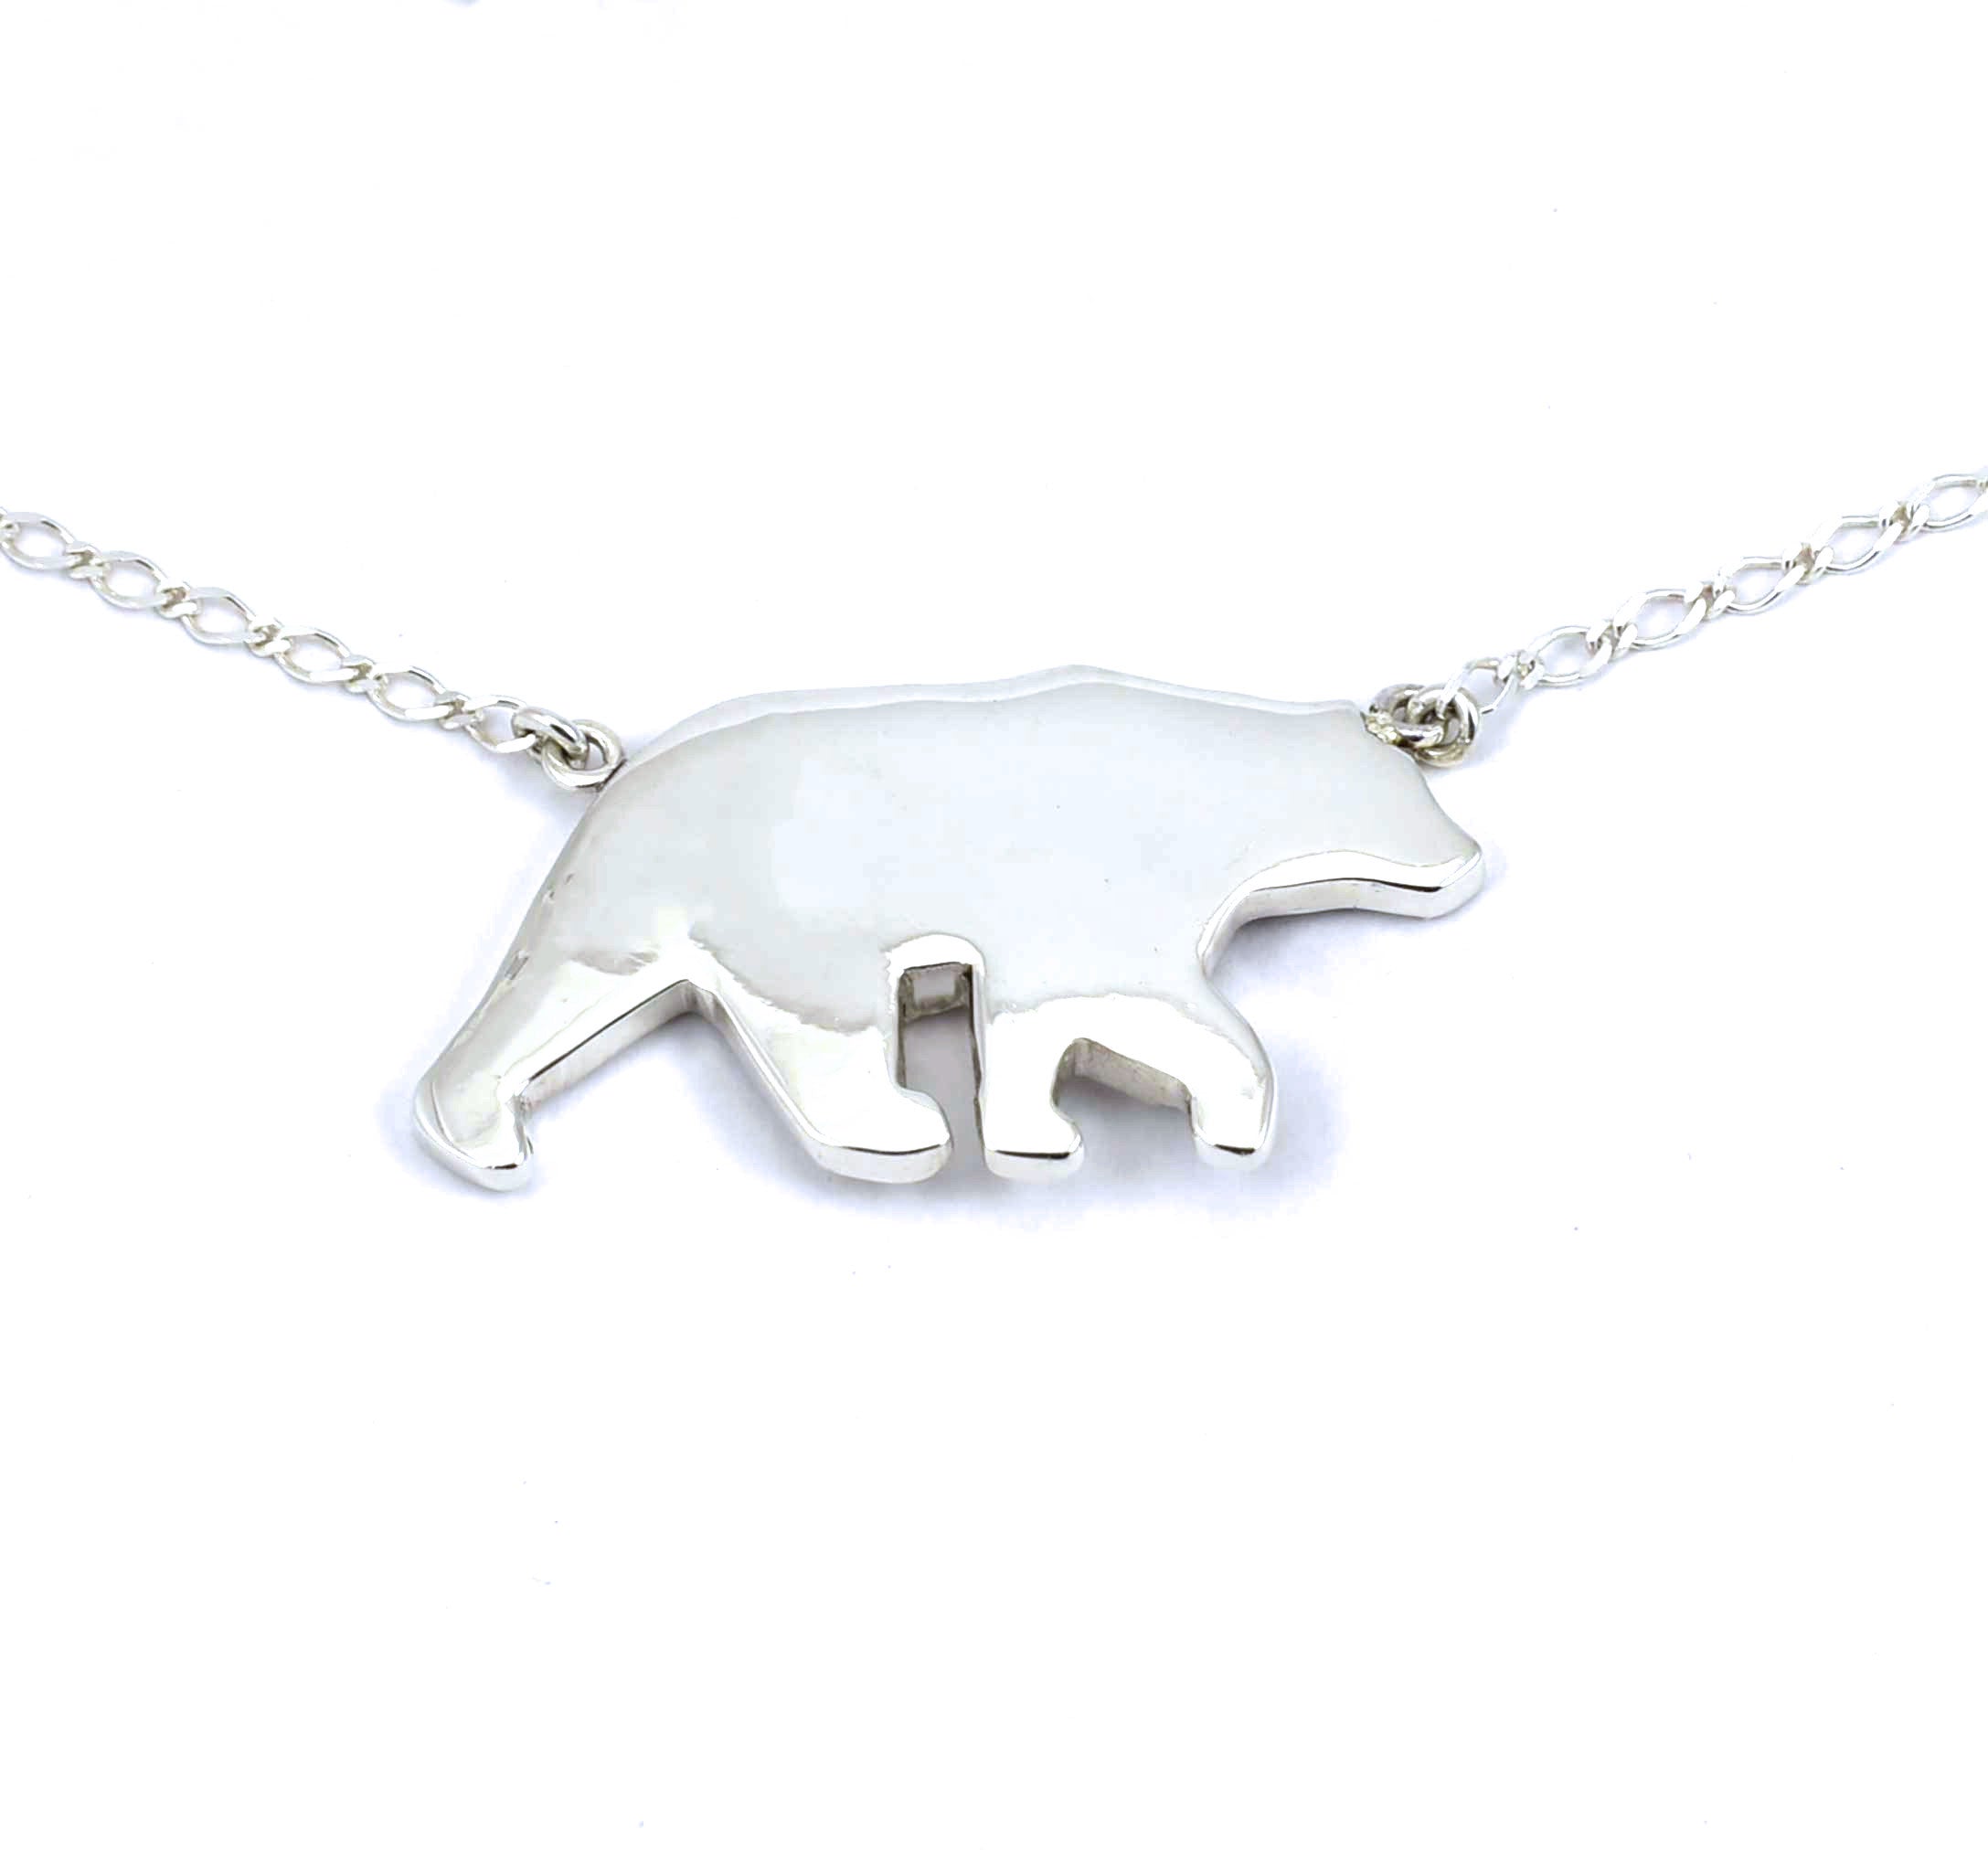 Rear view of large sterling silver bear pendant with tree accents and crushed gemstone inlay